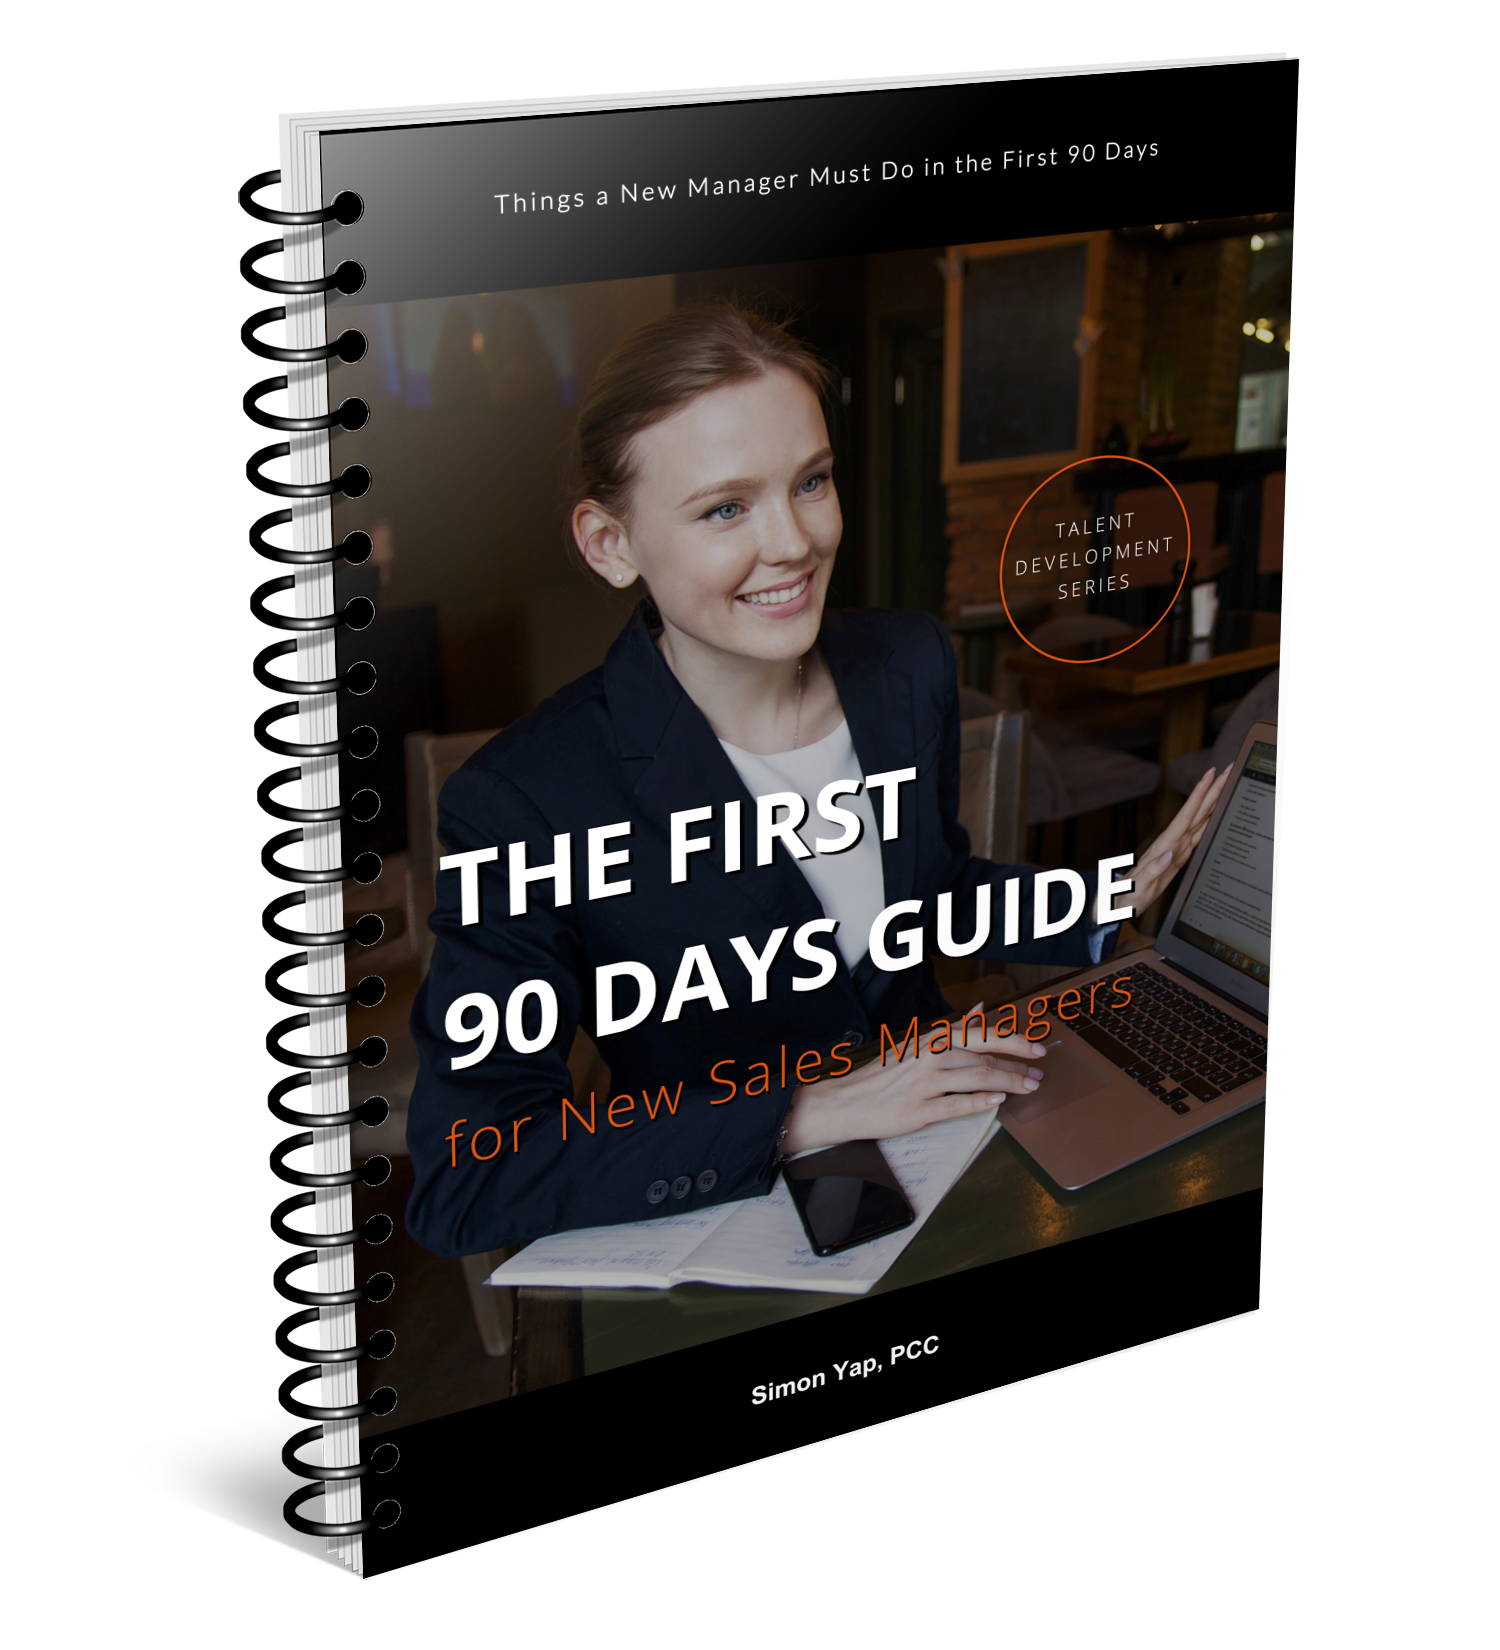 First 90 Days for New Sales Managers